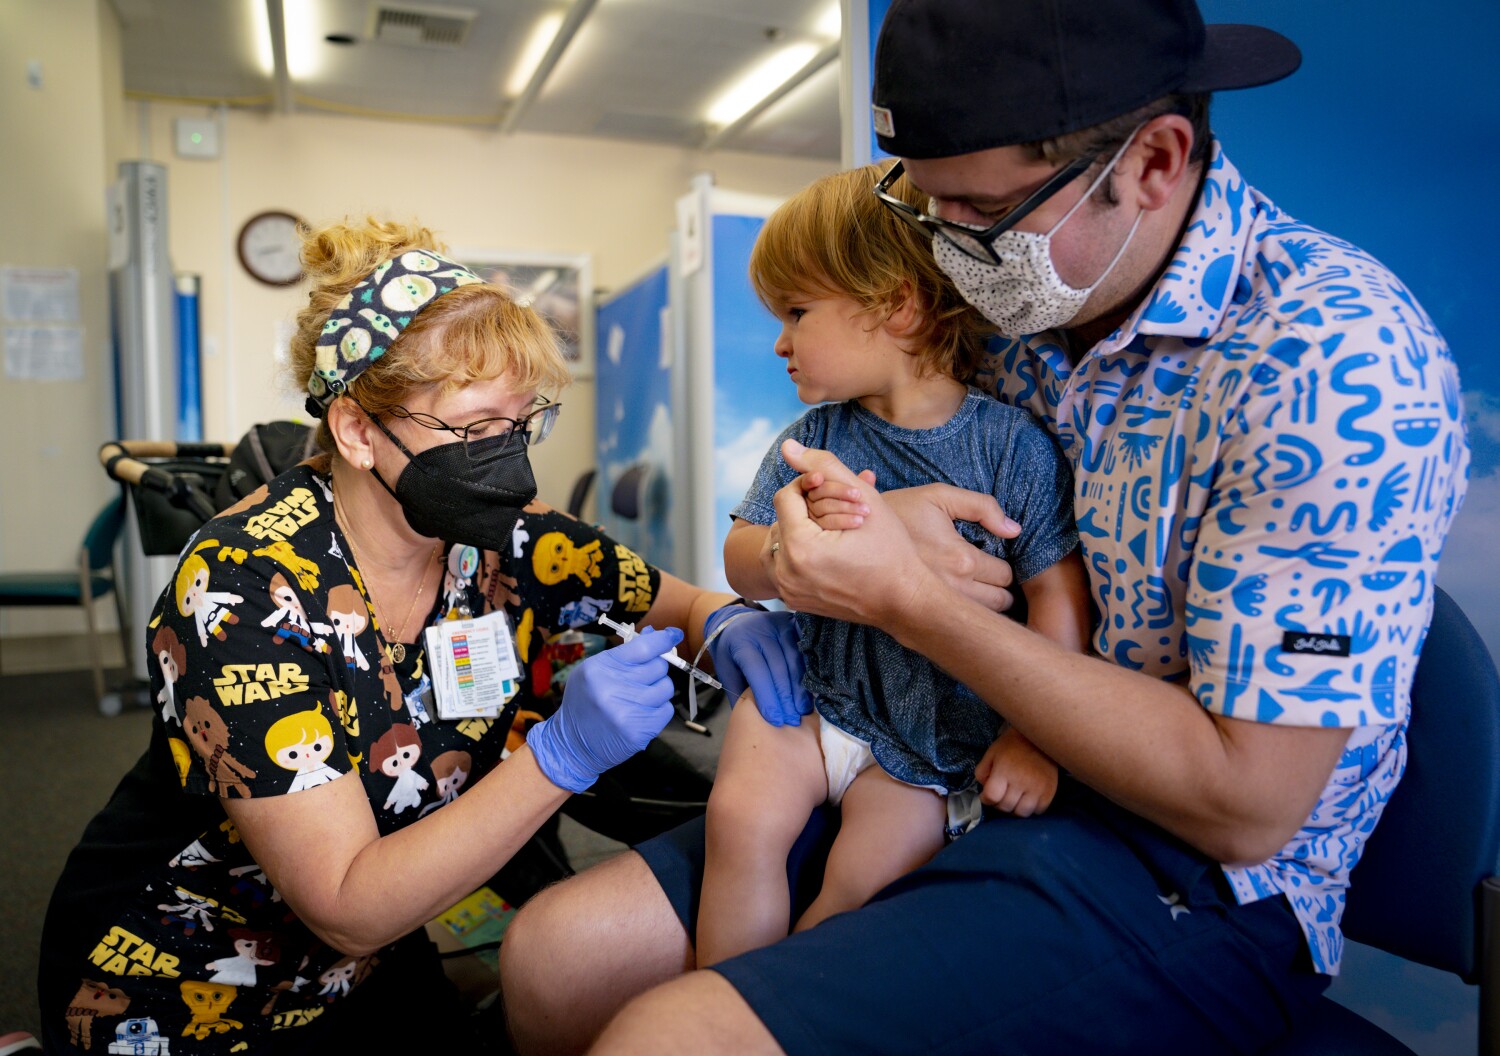 Families flock to Rady Children's Hospital for under-5 COVID vaccines